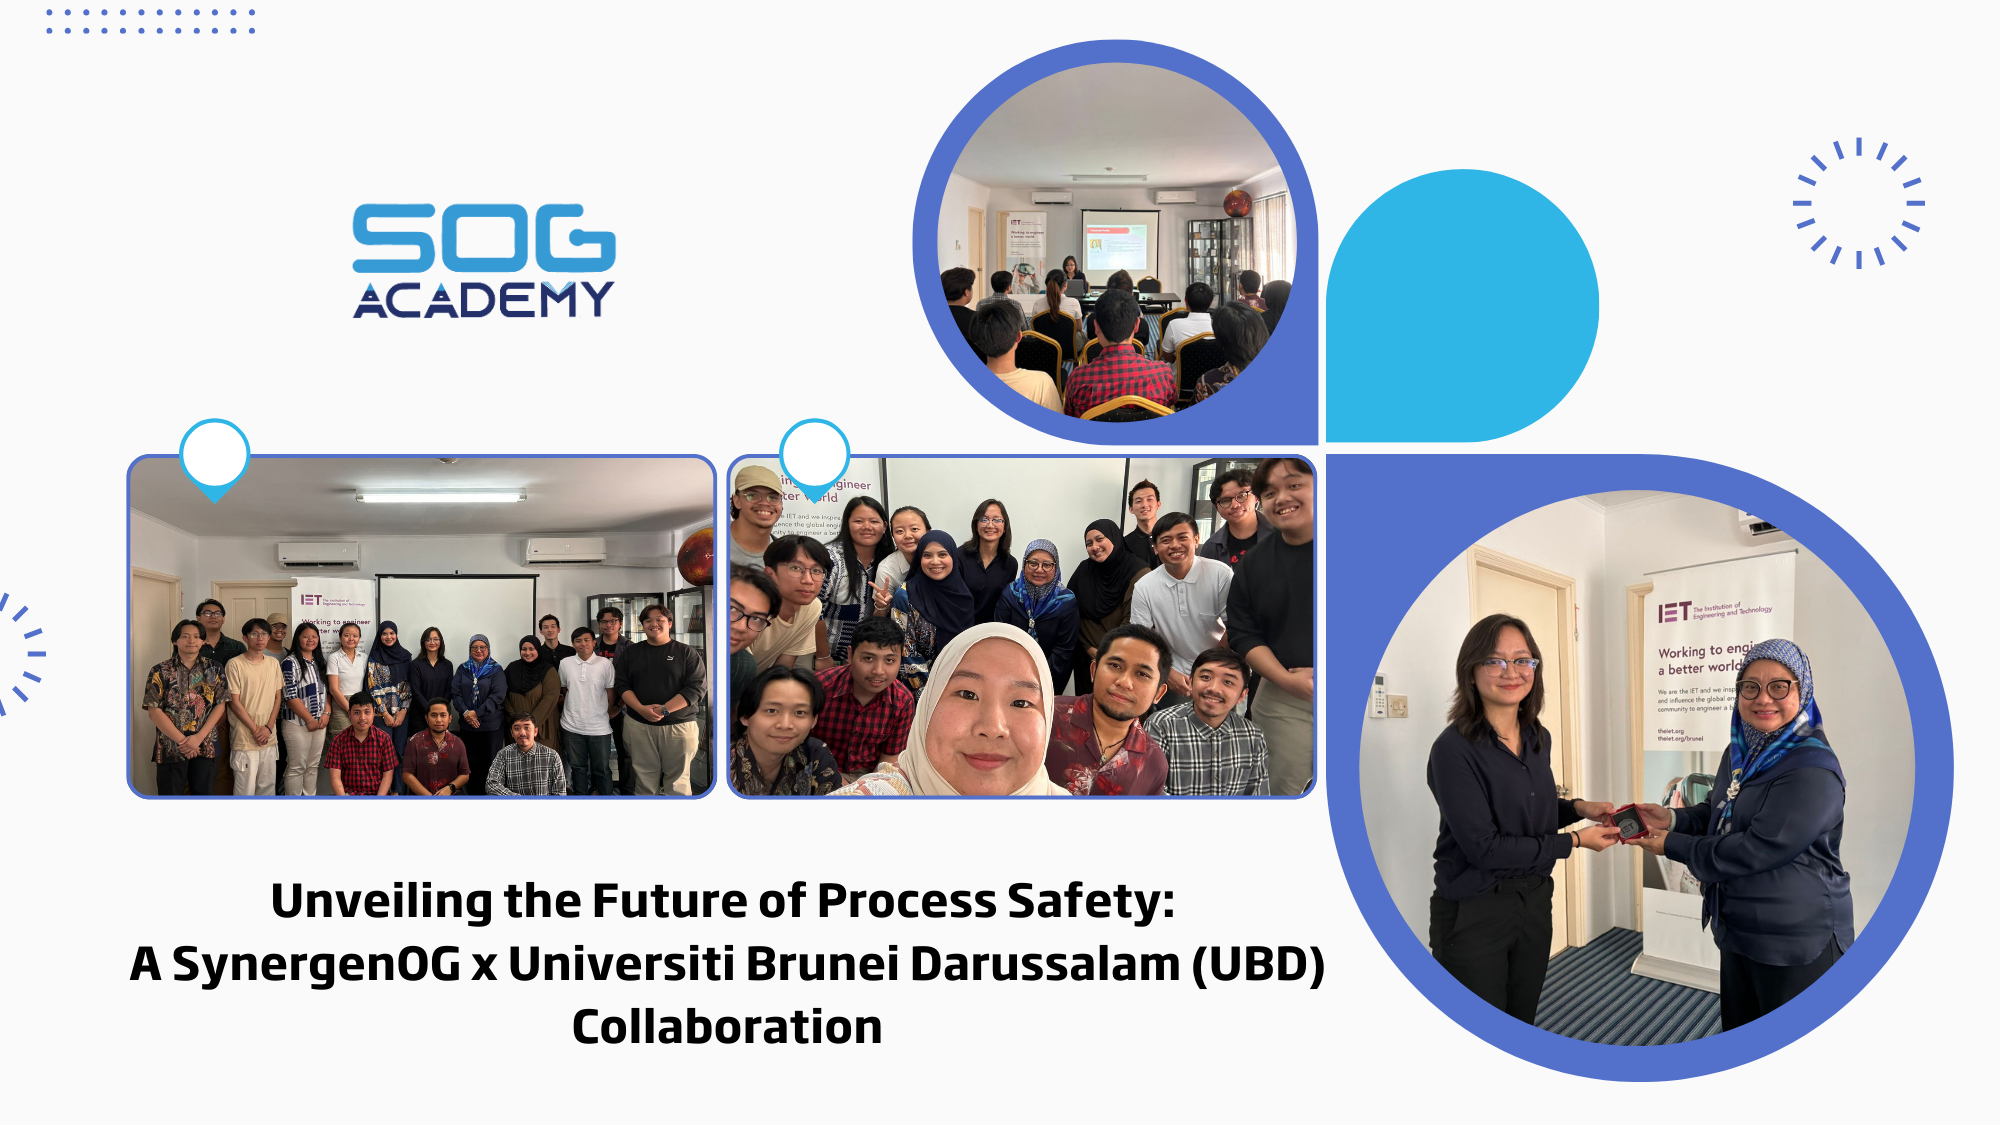 You are currently viewing Sparking Safety Conversations: SynergenOG’s Technical Talk at Universiti Brunei Darussalam with IET UBD-OC